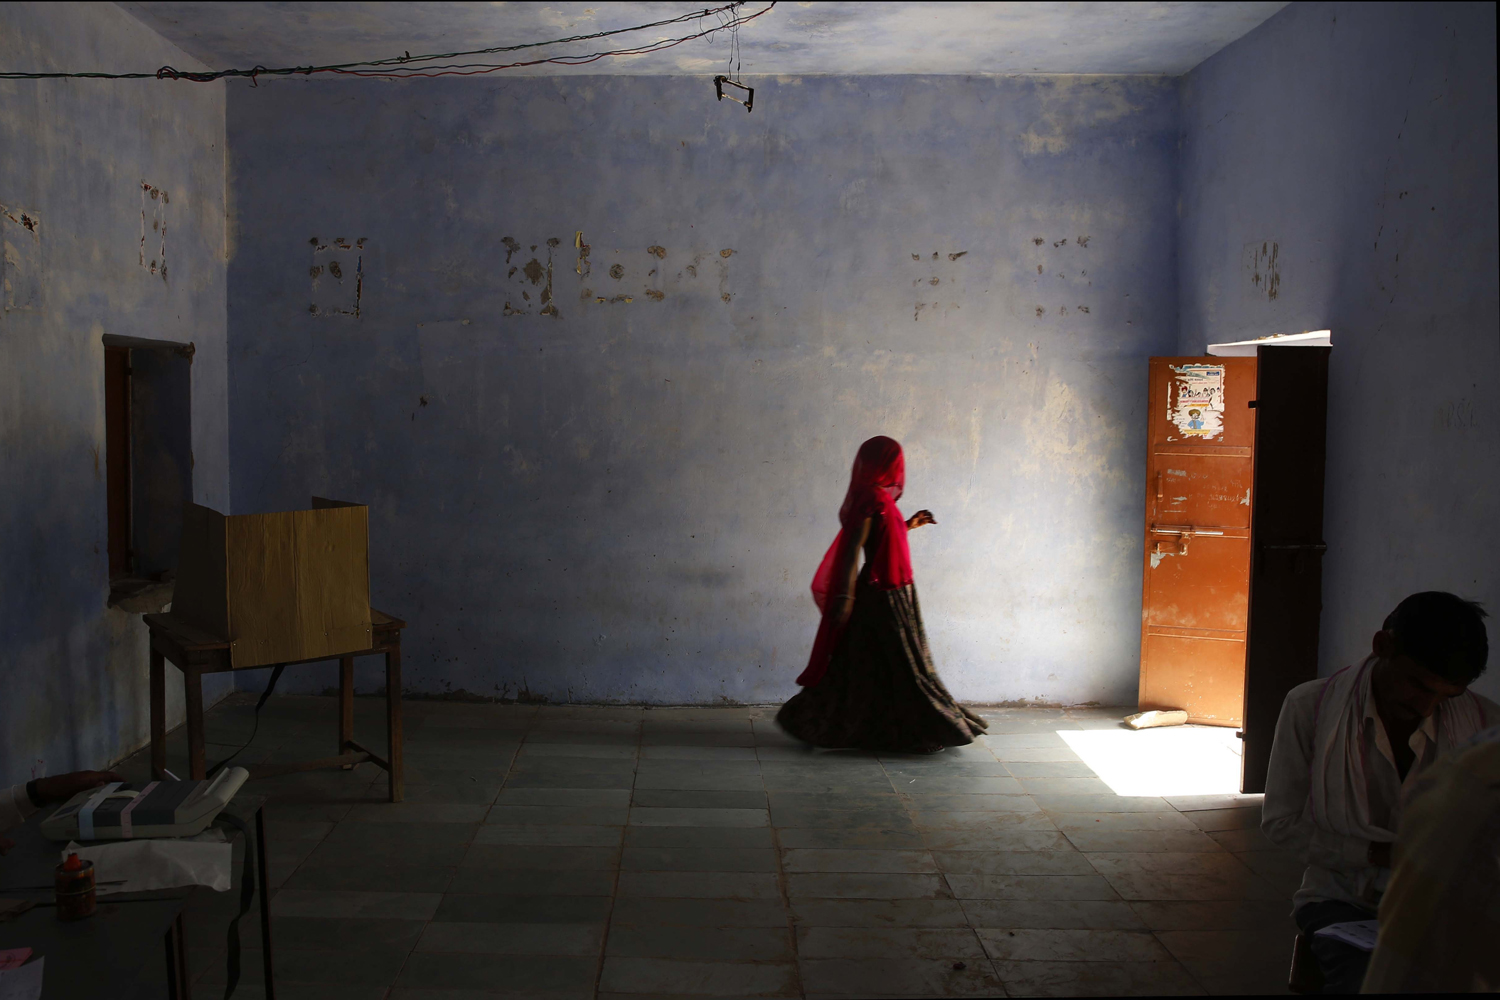 Apr. 24, 2014. An Indian woman leaves after casting her vote in a village near Sawai Madhopur, in the Indian state of Rajasthan. With 814 million eligible voters, India is voting in phases over six weeks. Results are expected May 16.